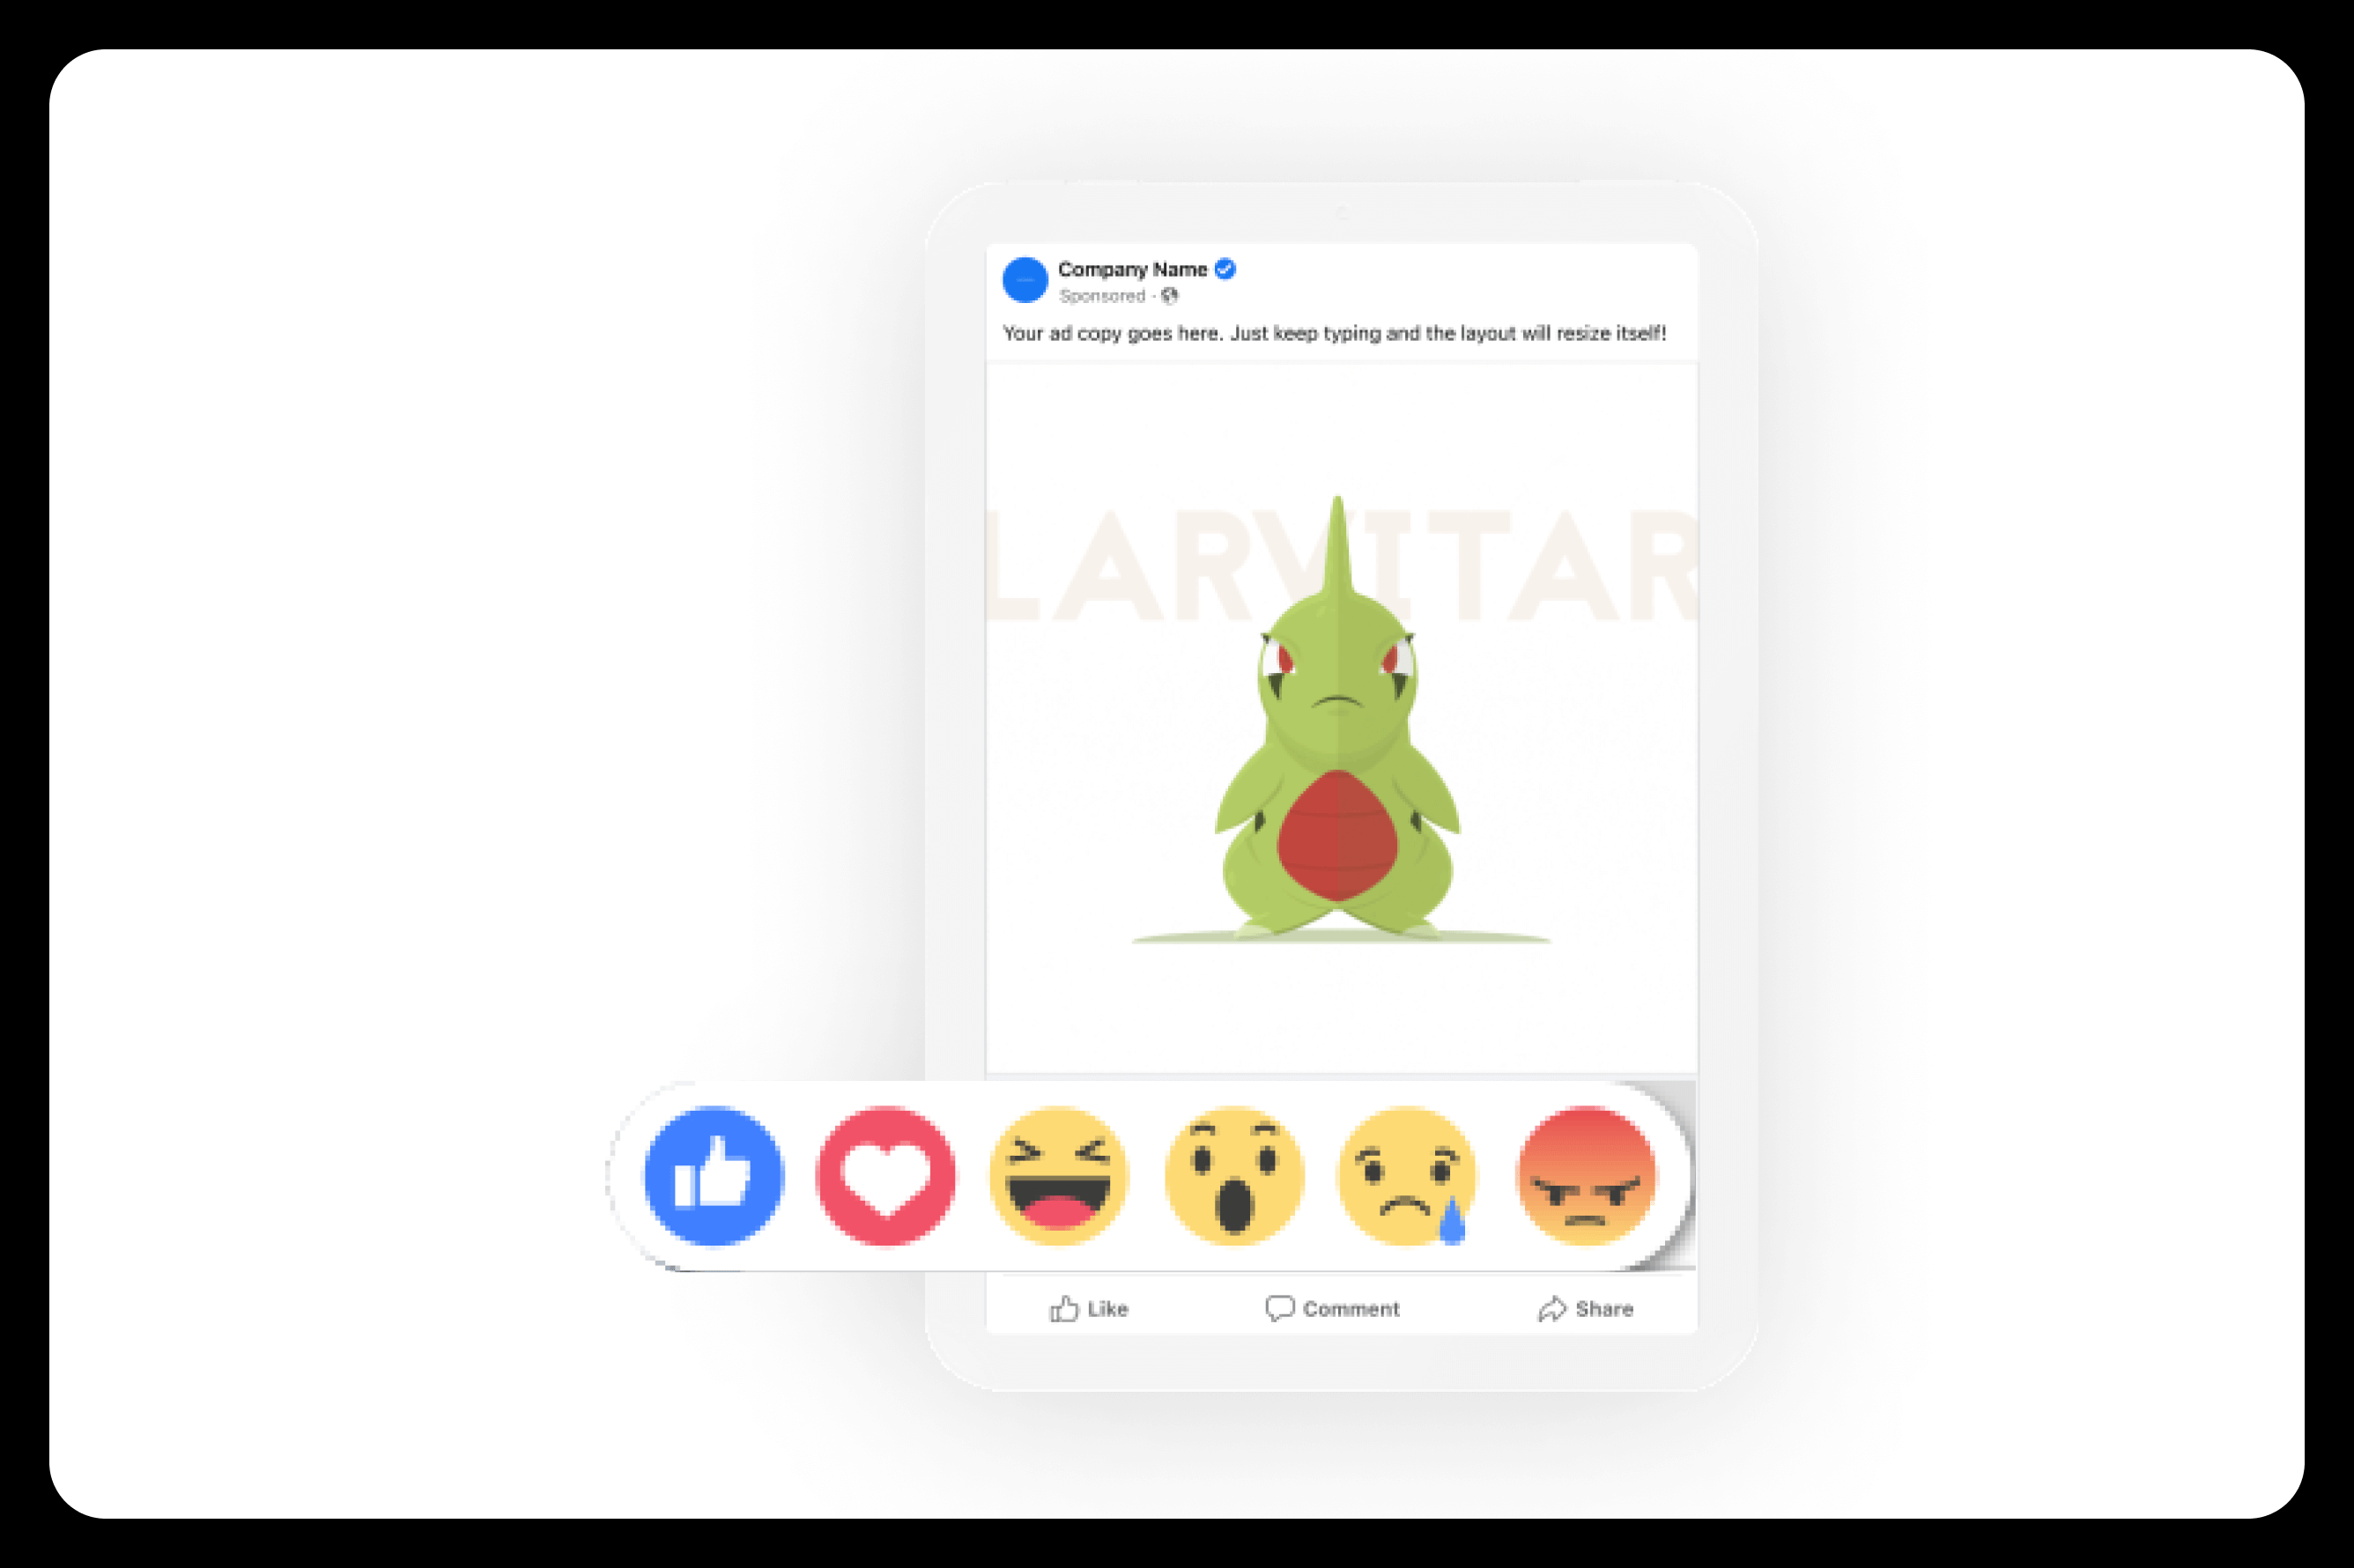  Facebook React options by using micro-interactions for improved UX.